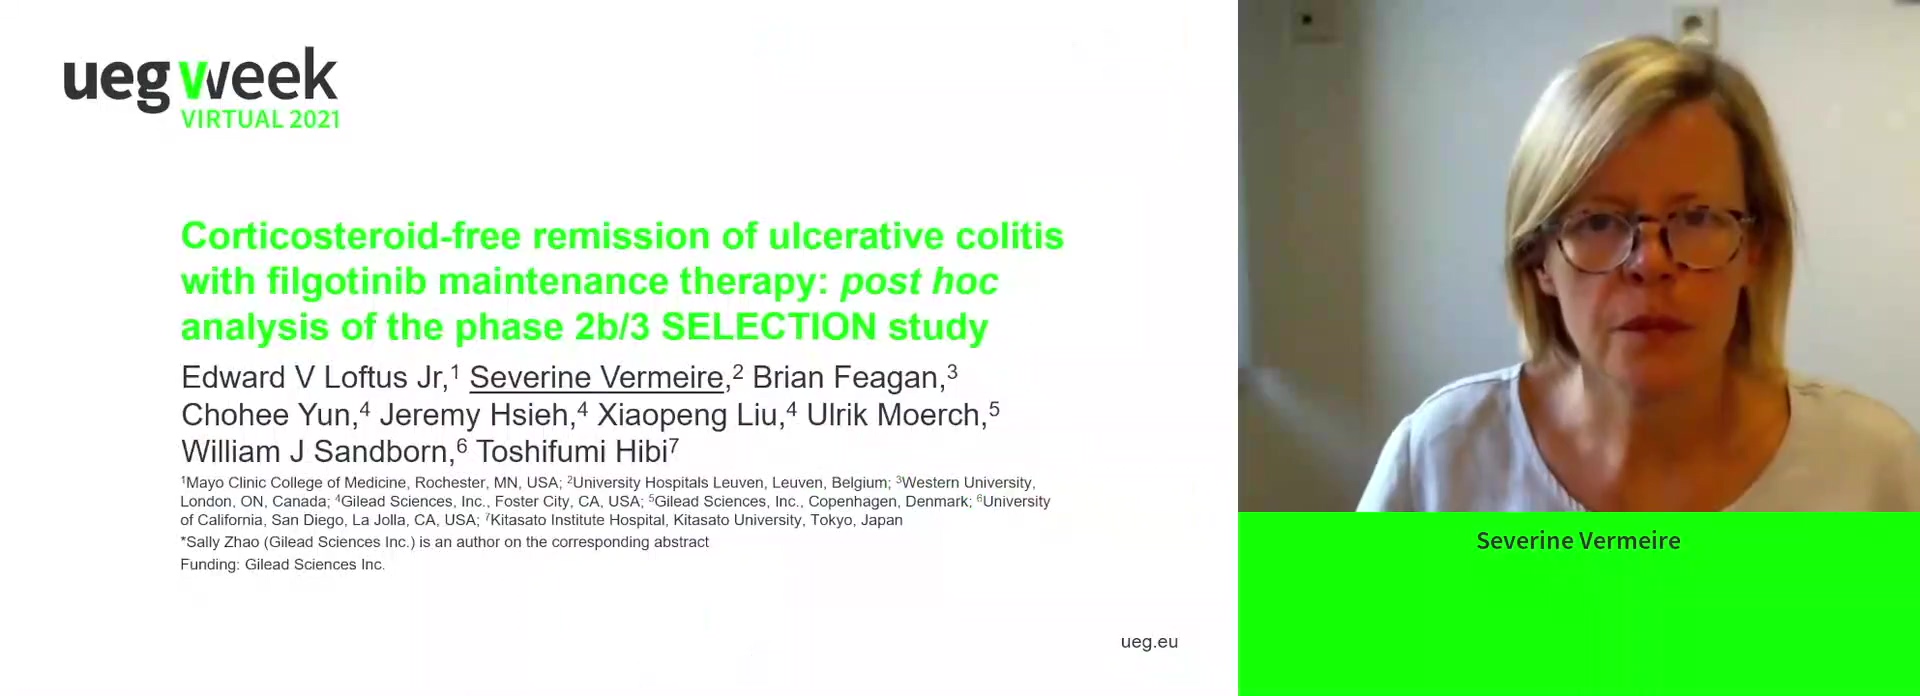 CORTICOSTEROID-FREE REMISSION OF ULCERATIVE COLITIS WITH FILGOTINIB MAINTENANCE THERAPY: POST HOC ANALYSIS OF THE PHASE 2B/3 SELECTION STUDY